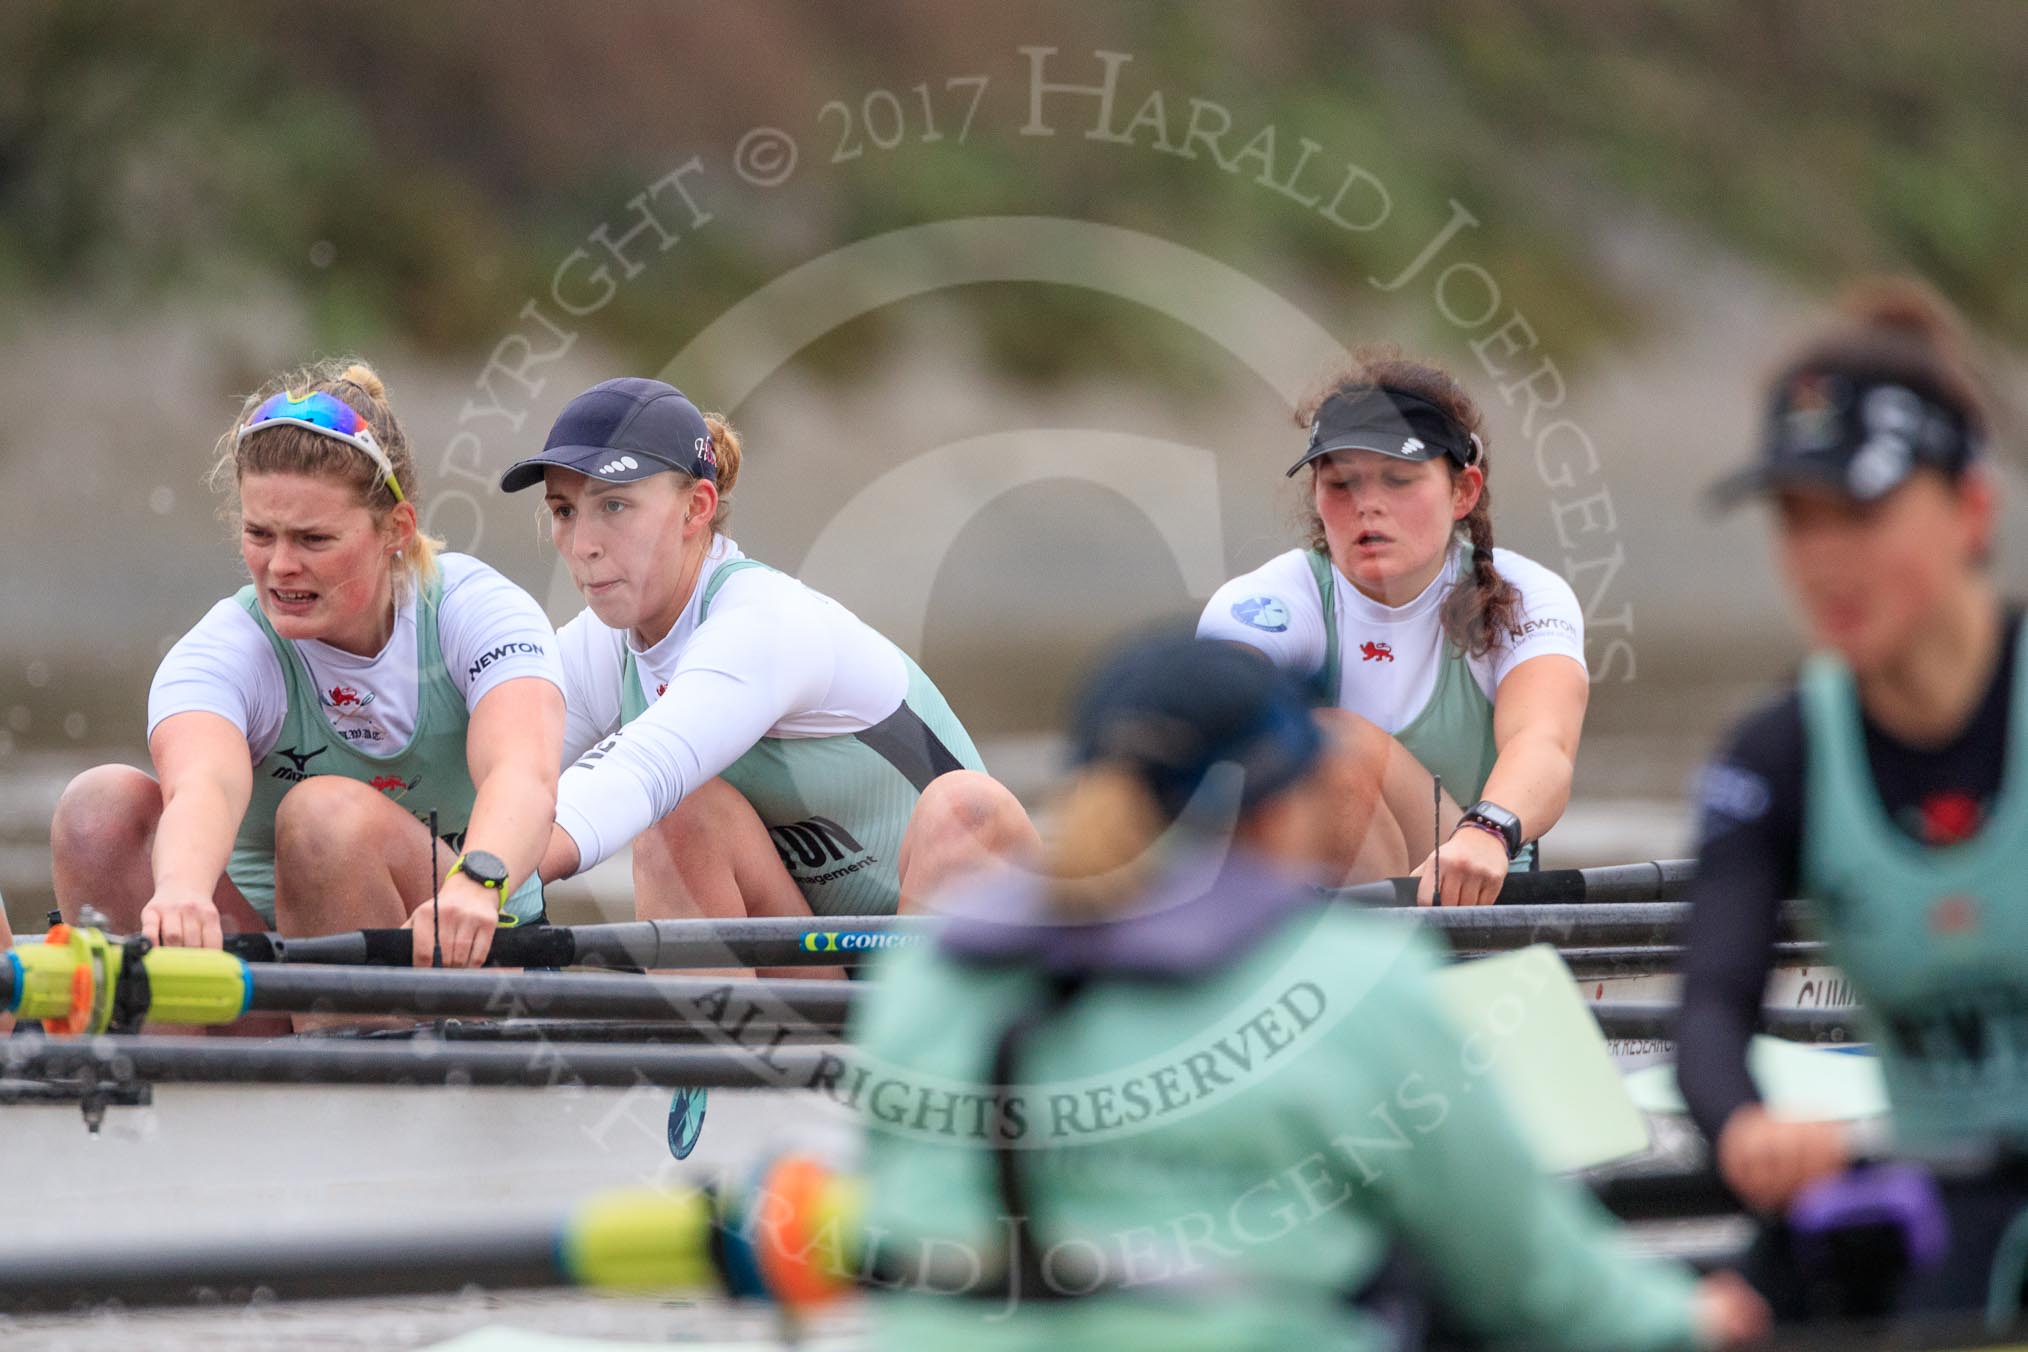 The Boat Race season 2018 - Women's Boat Race Trial Eights (CUWBC, Cambridge): A close fight betwwen the two Cambridge crews, 3 Sally O Brien, 2 Millie Perrin and  bow Eve Caroe in Expecto Patronum , cox Sophie Wrixon and stroke Imogen Grant in Wingardium Leviosa.
River Thames between Putney Bridge and Mortlake,
London SW15,

United Kingdom,
on 05 December 2017 at 12:49, image #104